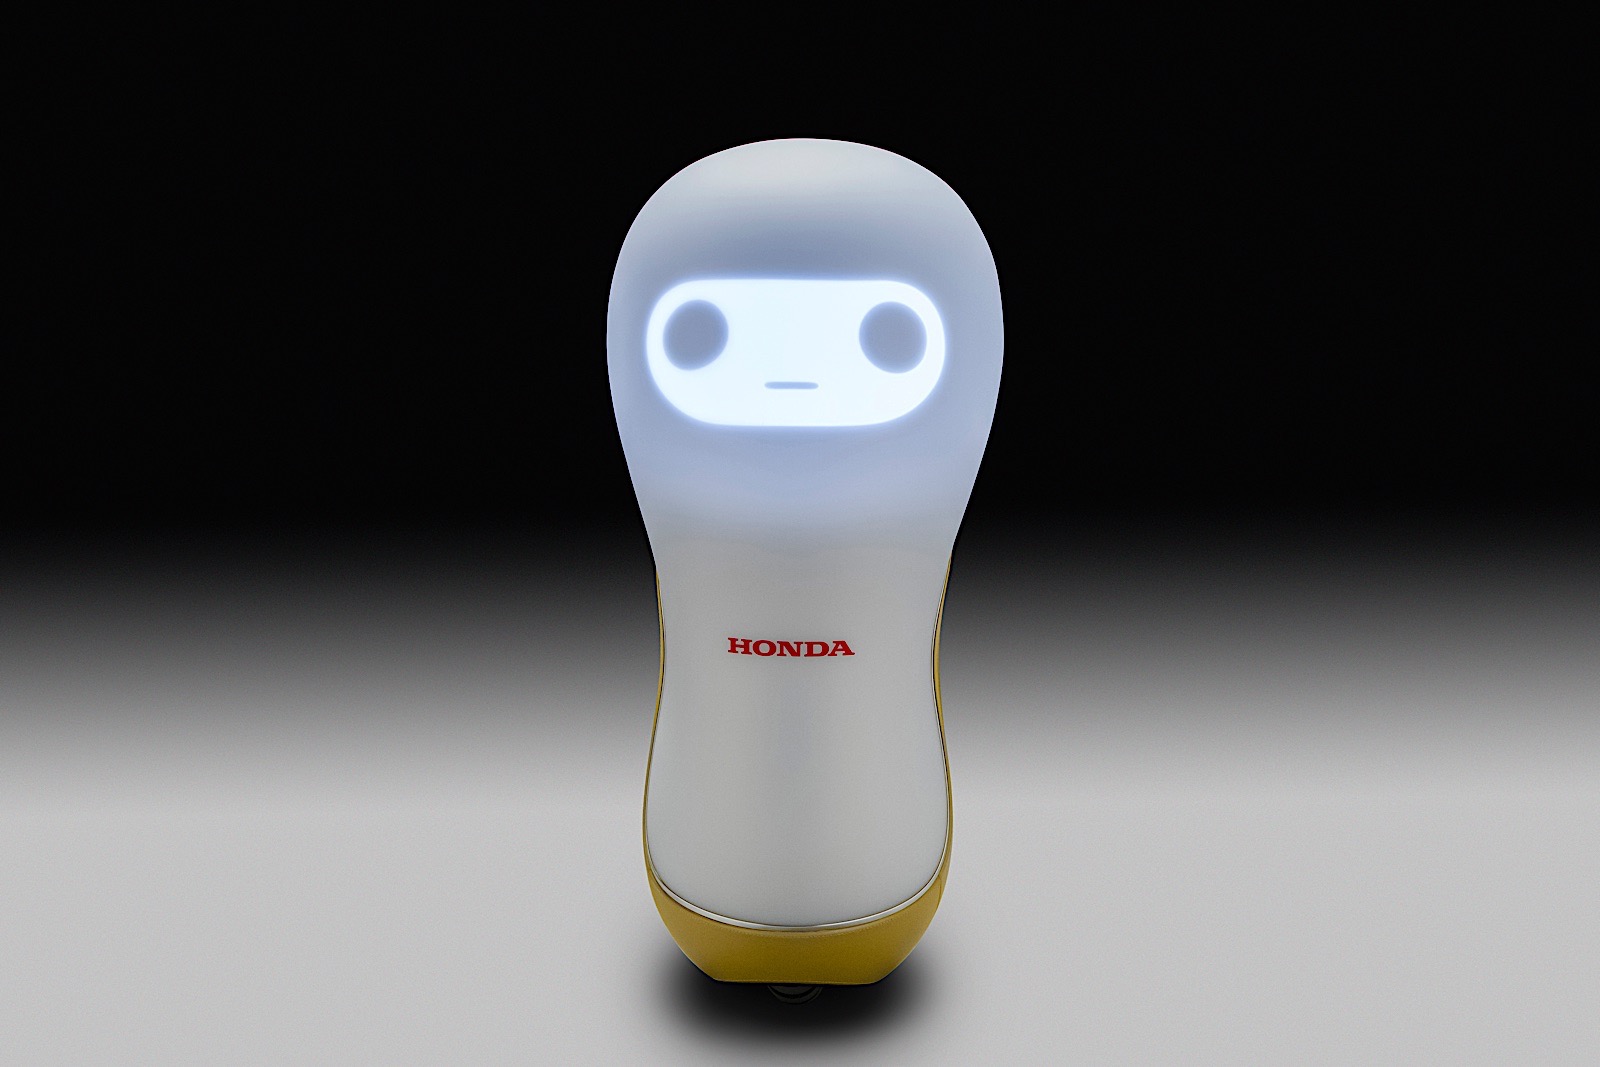 Hondaâ€™s 3E-A18 displays simple and easy-to-understand facial expressions with a friendly design.